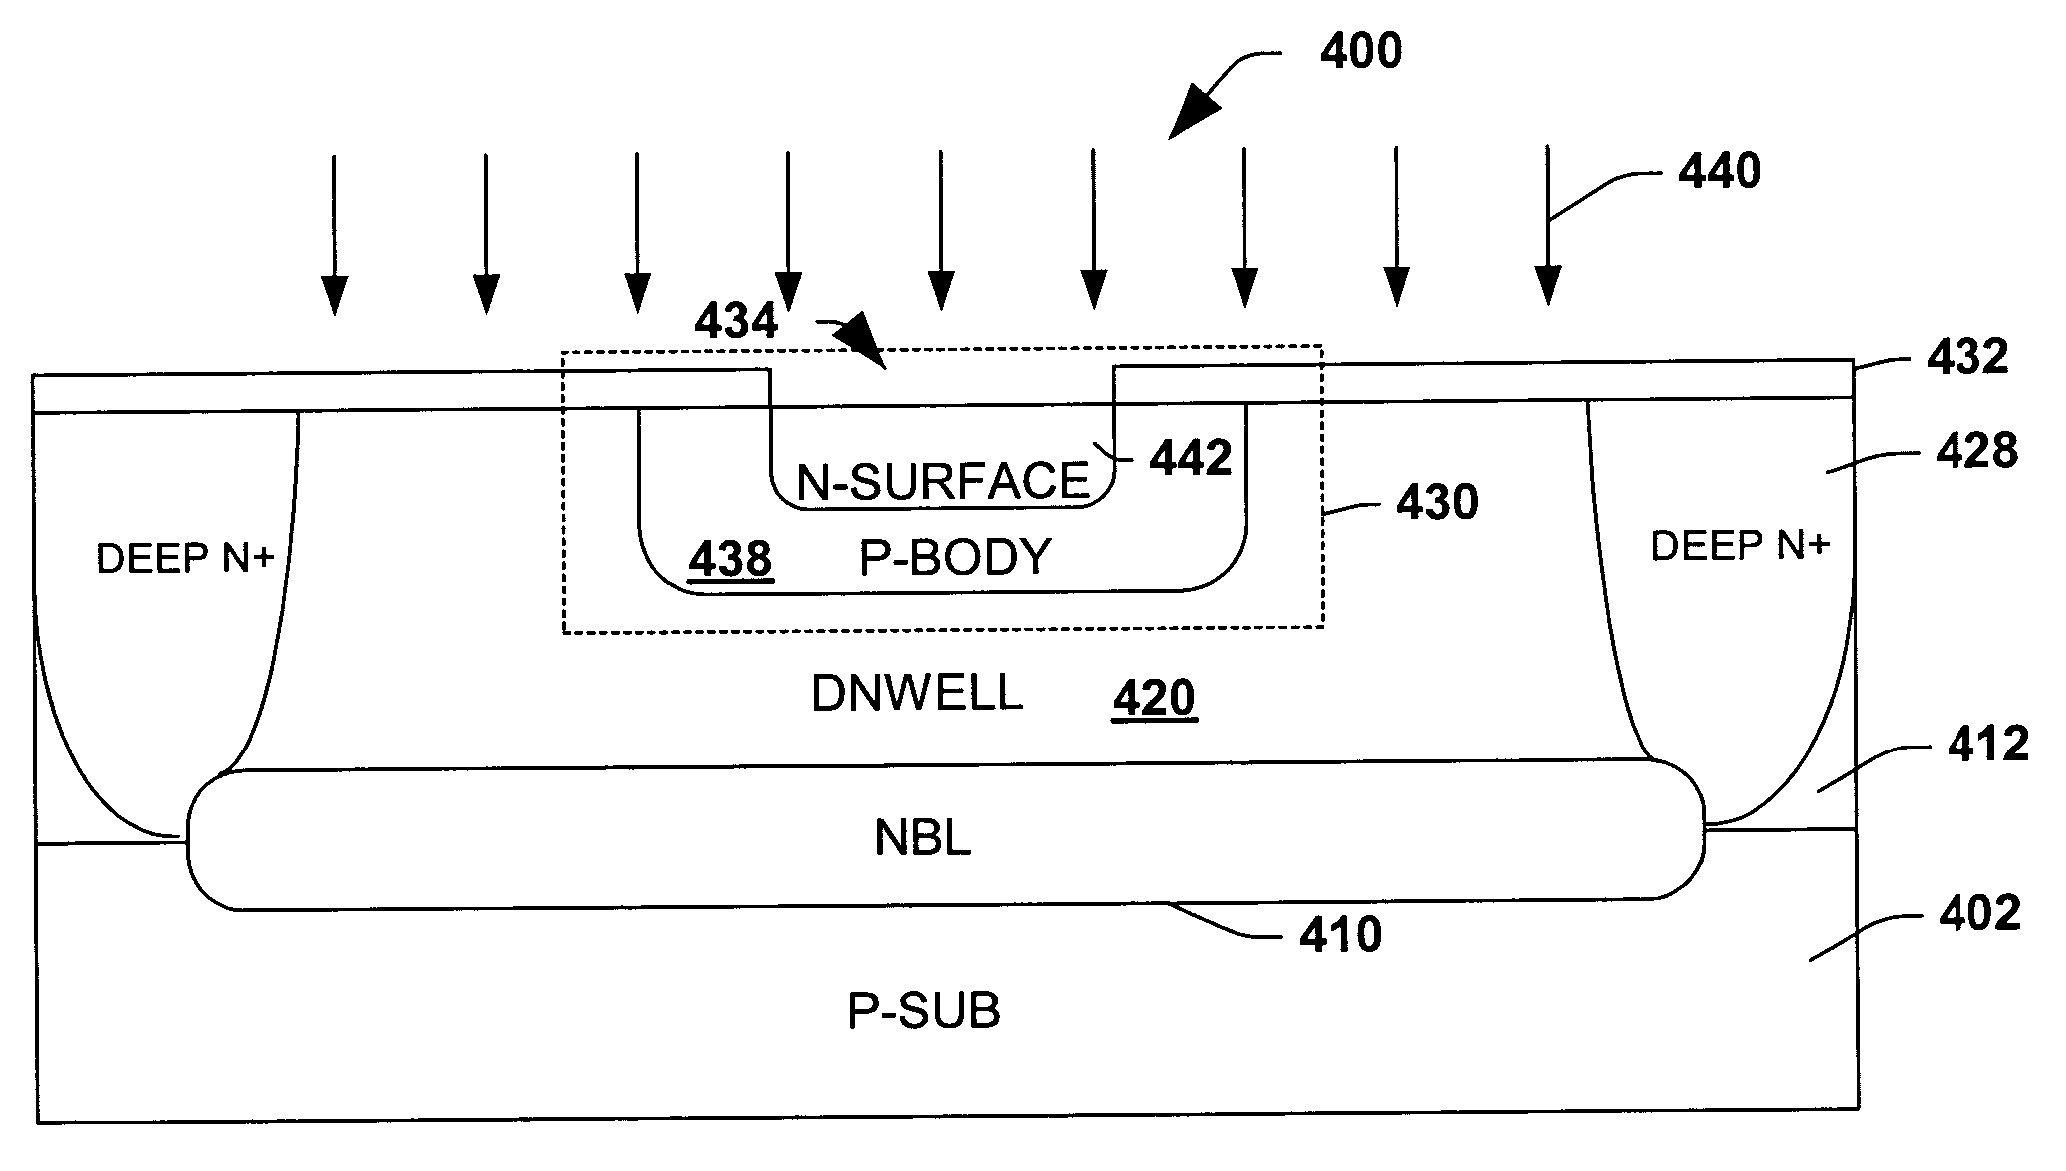 Single poly-emitter PNP using DWELL diffusion in a BiCMOS technology